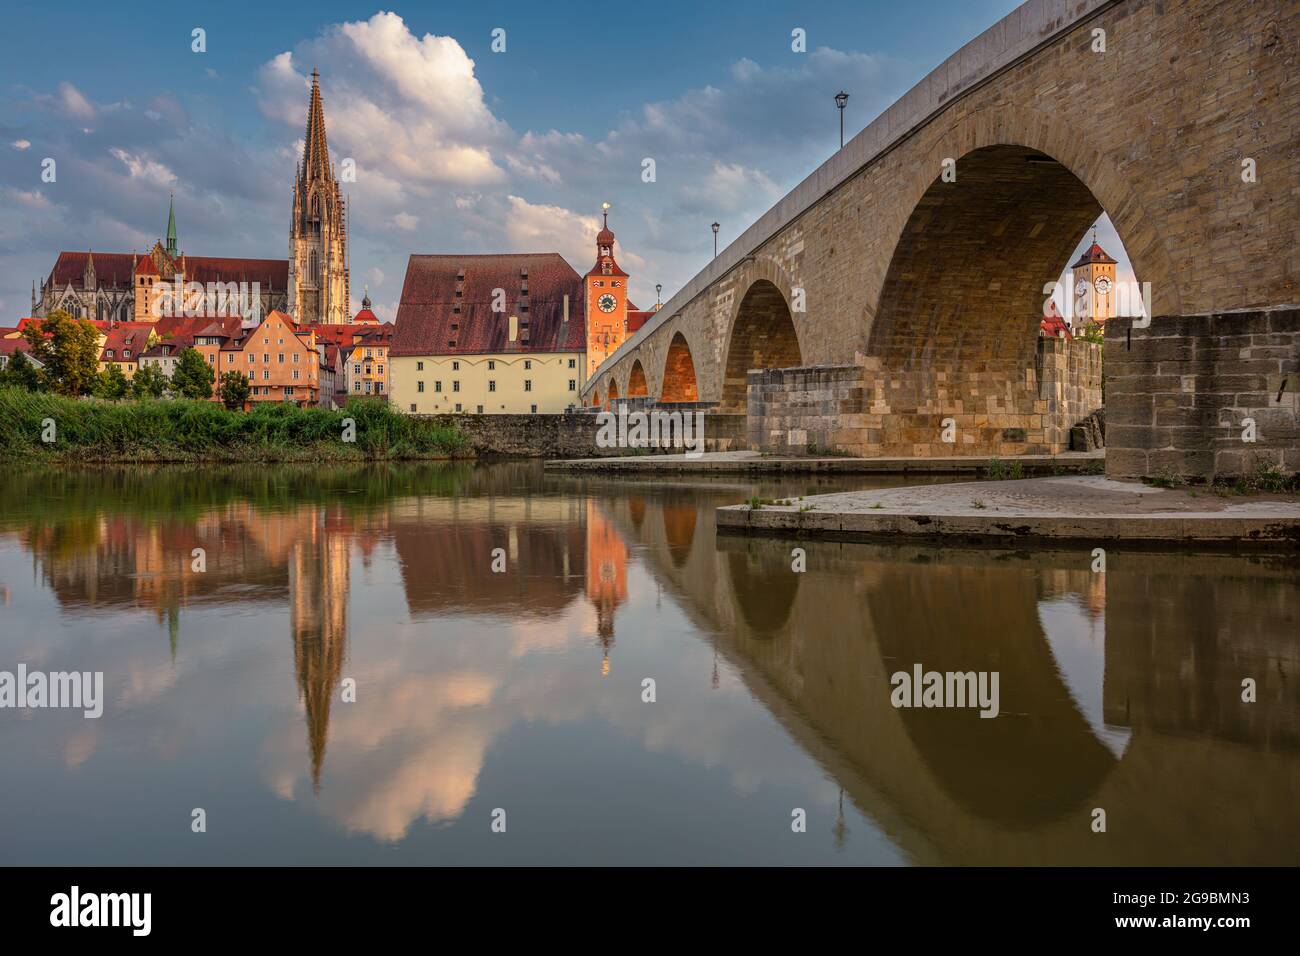 Regensburg, Germany. Cityscape image of Regensburg, Germany with Old Stone Bridge over Danube River and St. Peter Cathedral at summer sunset. Stock Photo